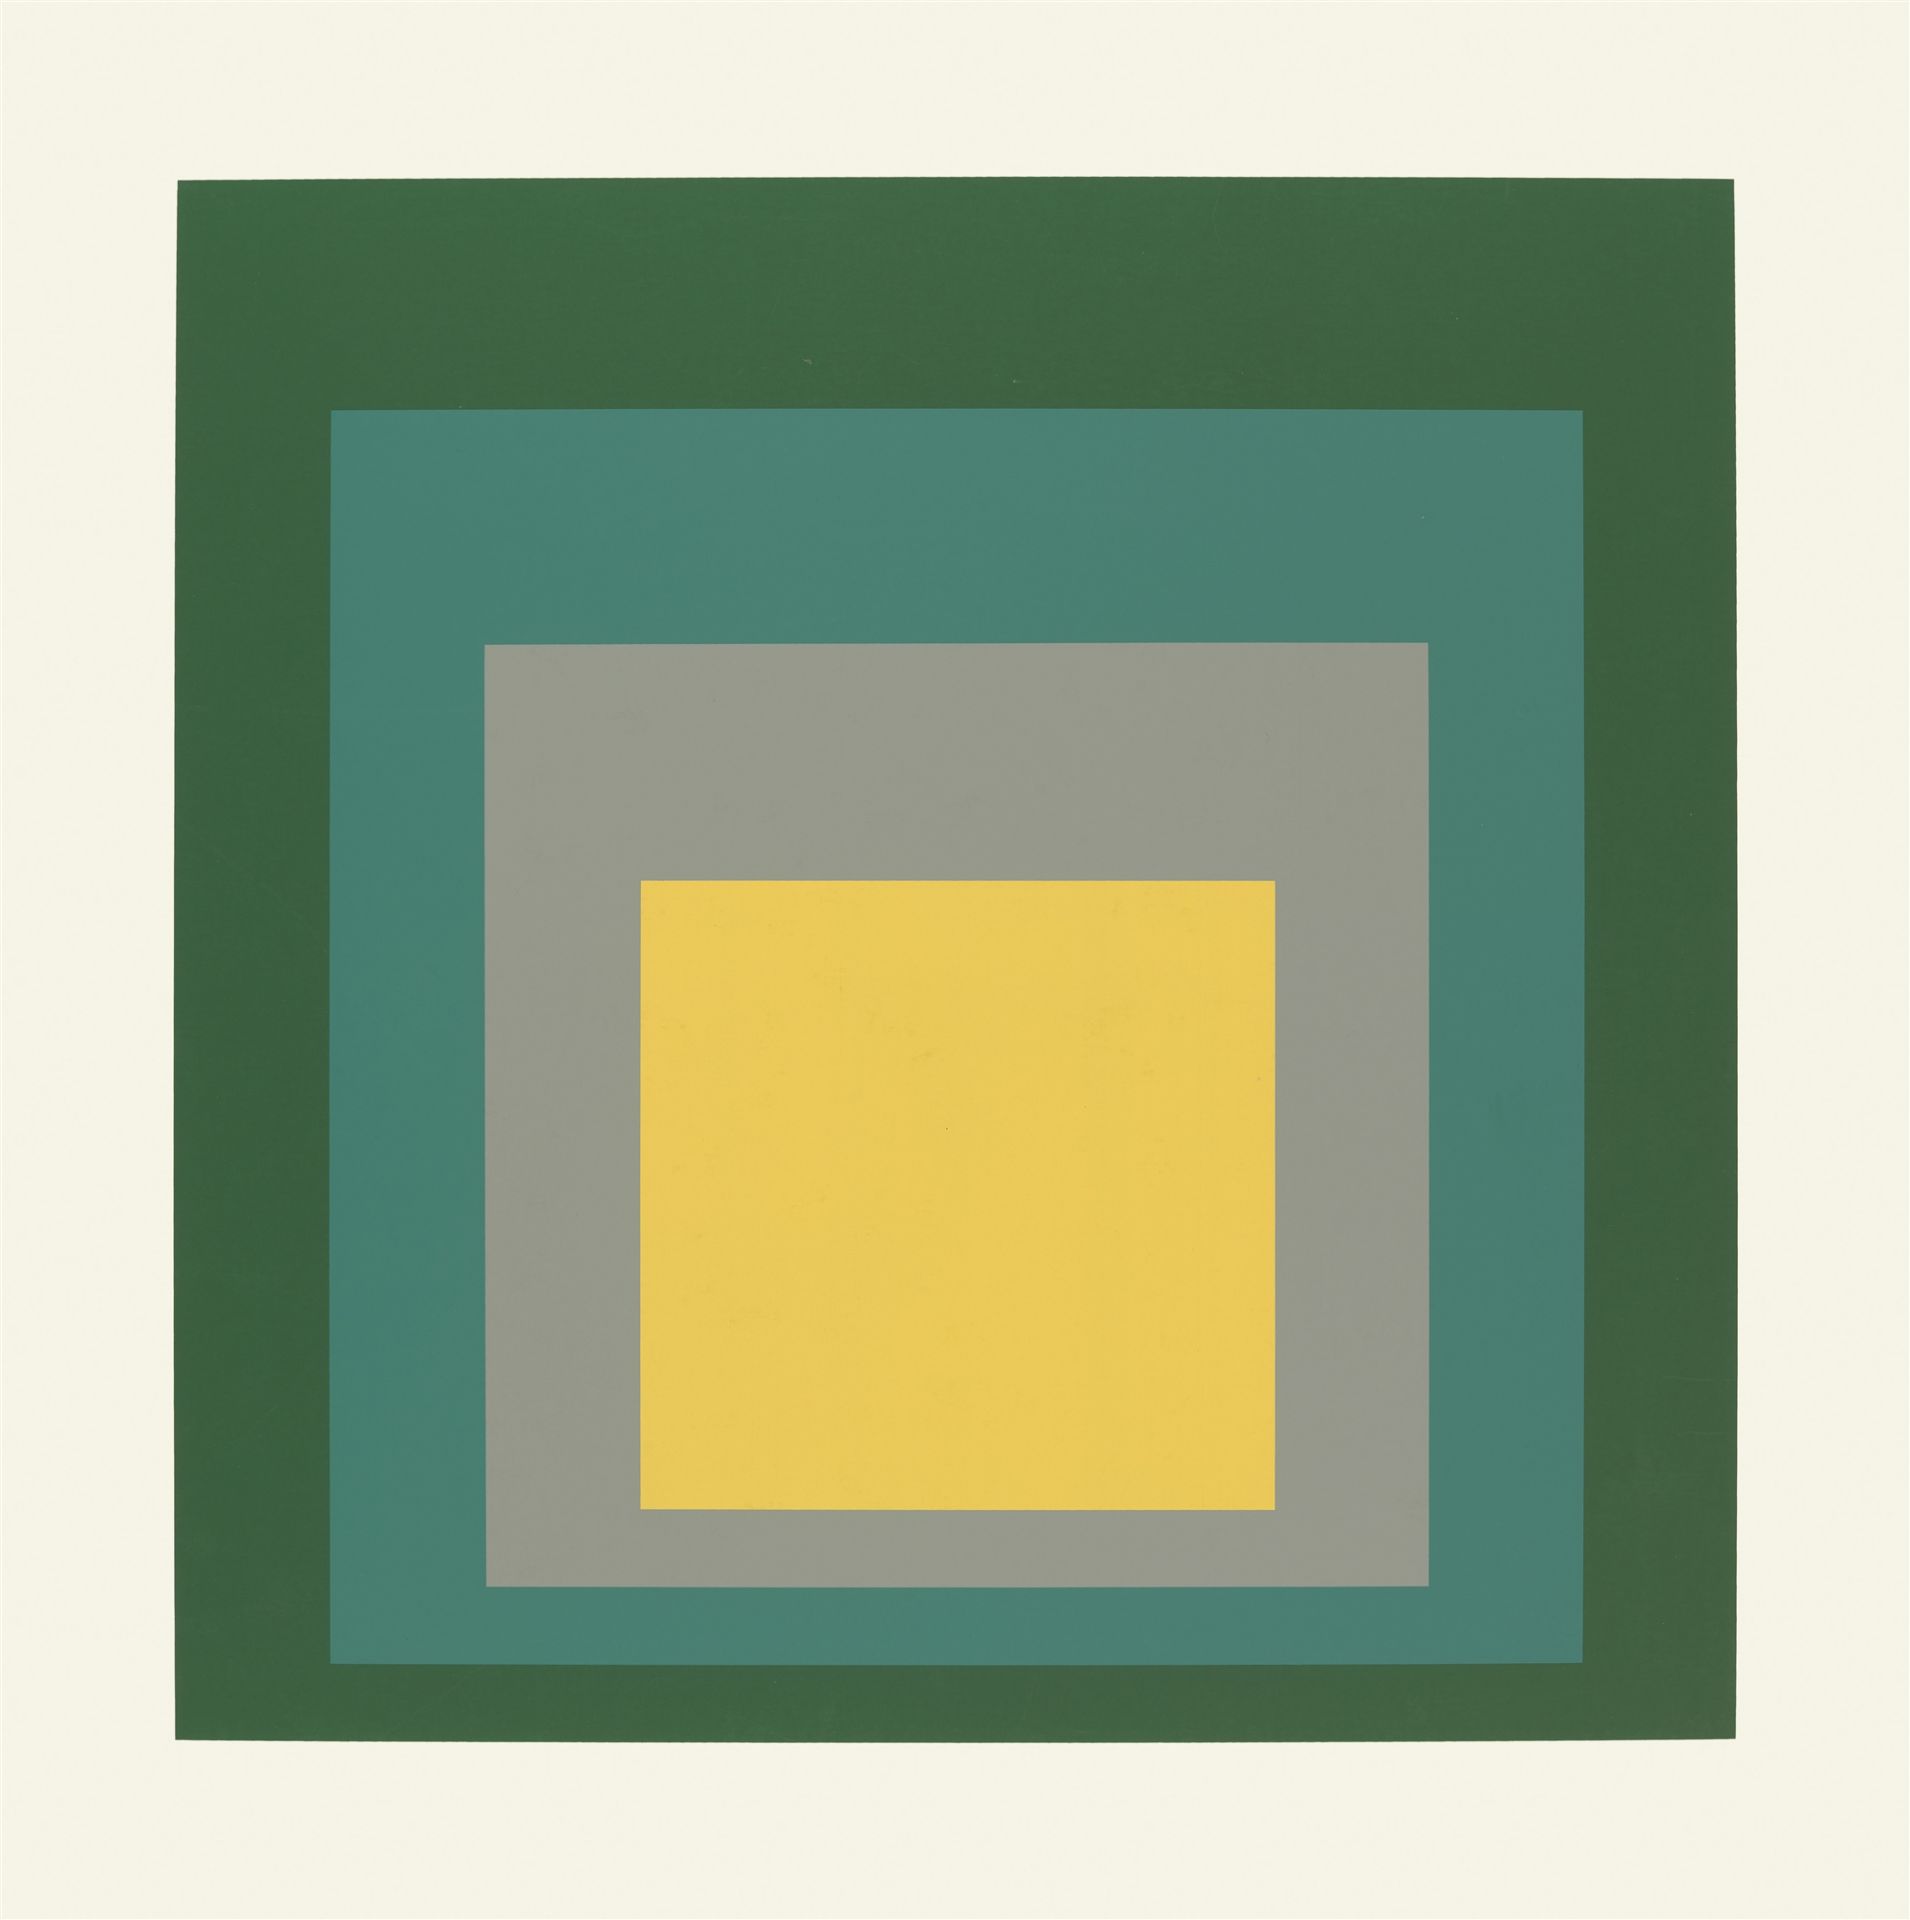 Josef Albers, SP (Homage to the Square) - Image 7 of 13